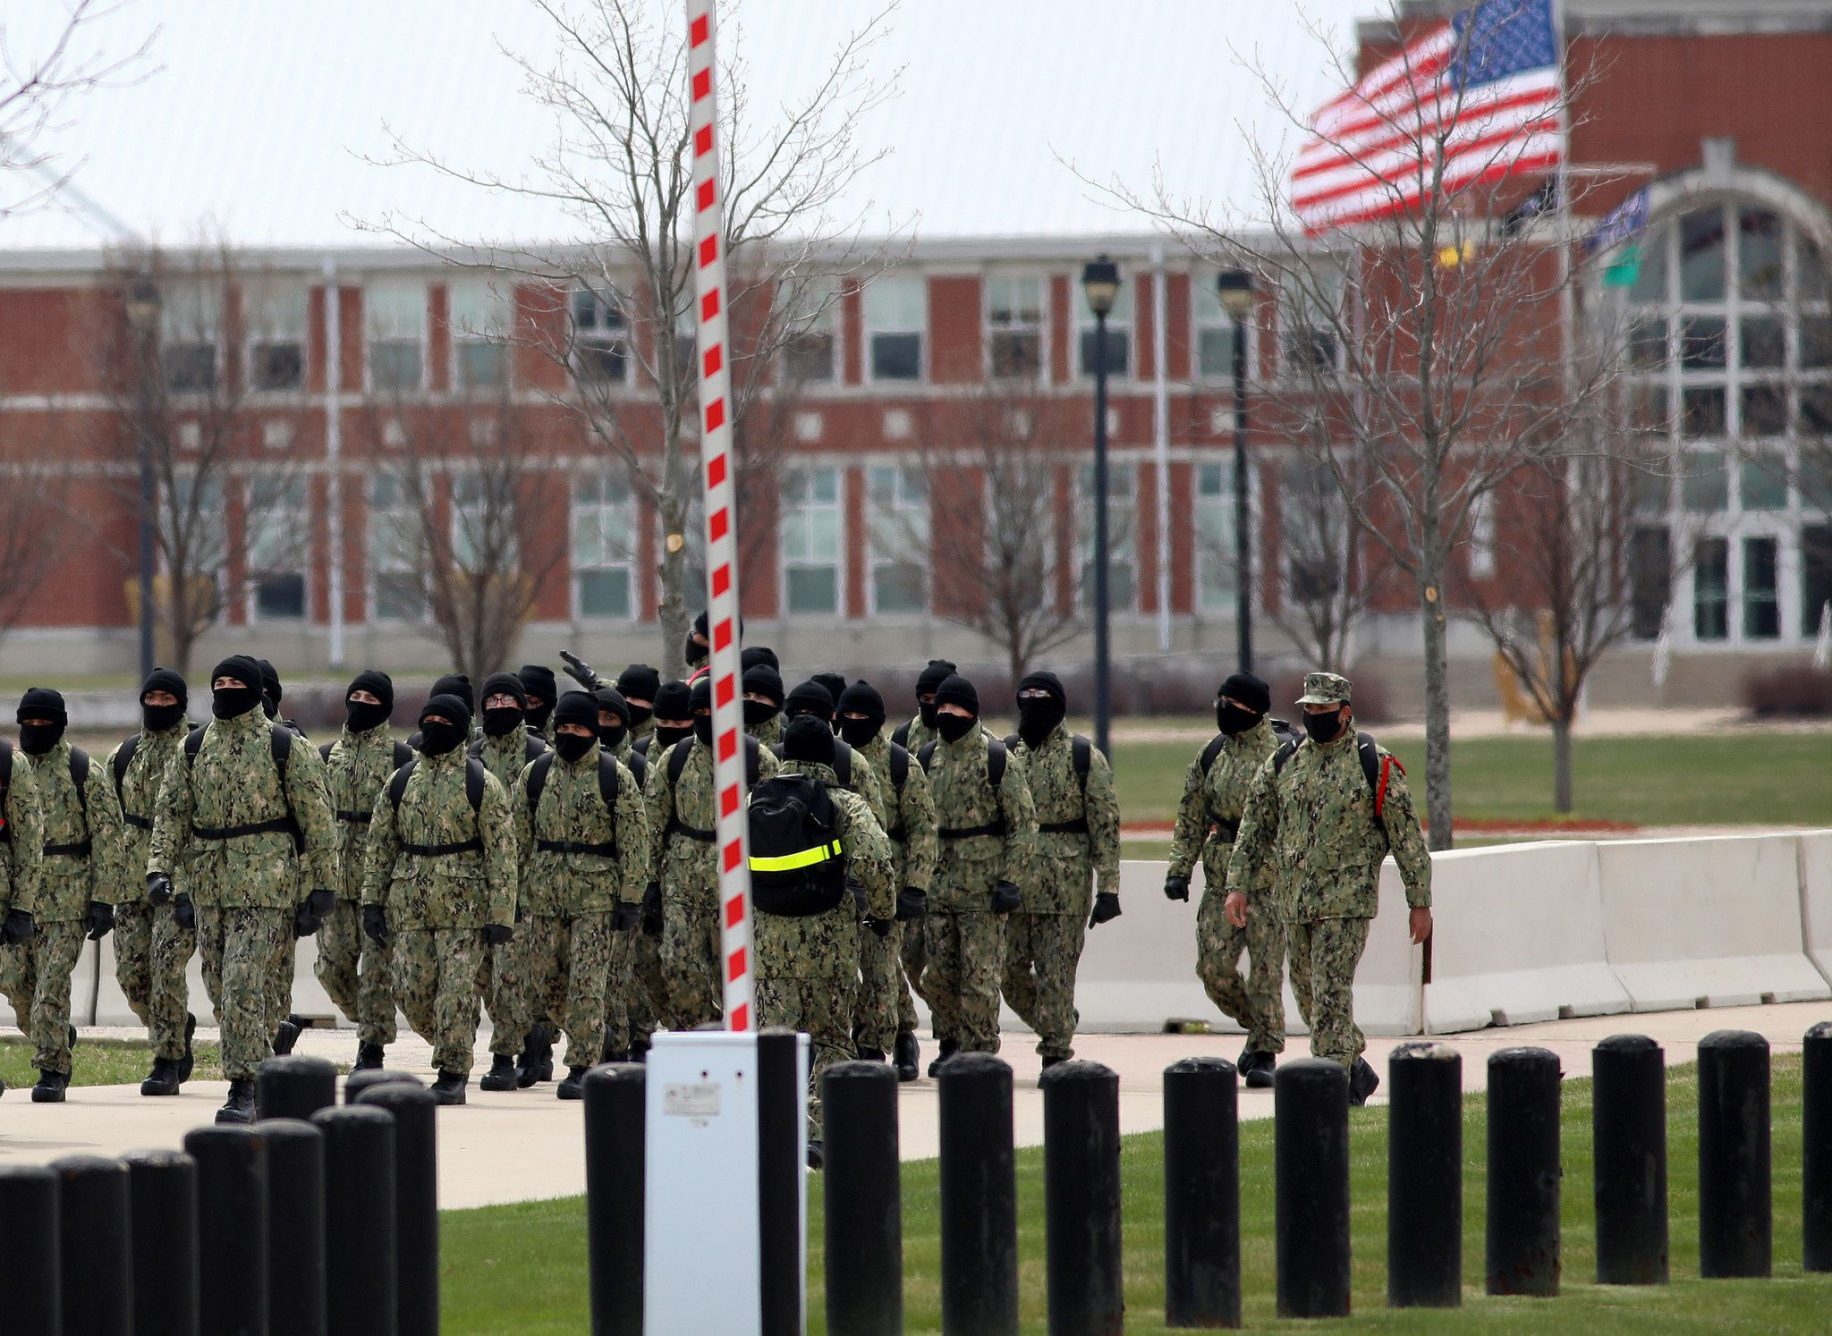 500 New Recruits Are About To Start Boot Camp At Naval Station Great Lakes The Military Won T